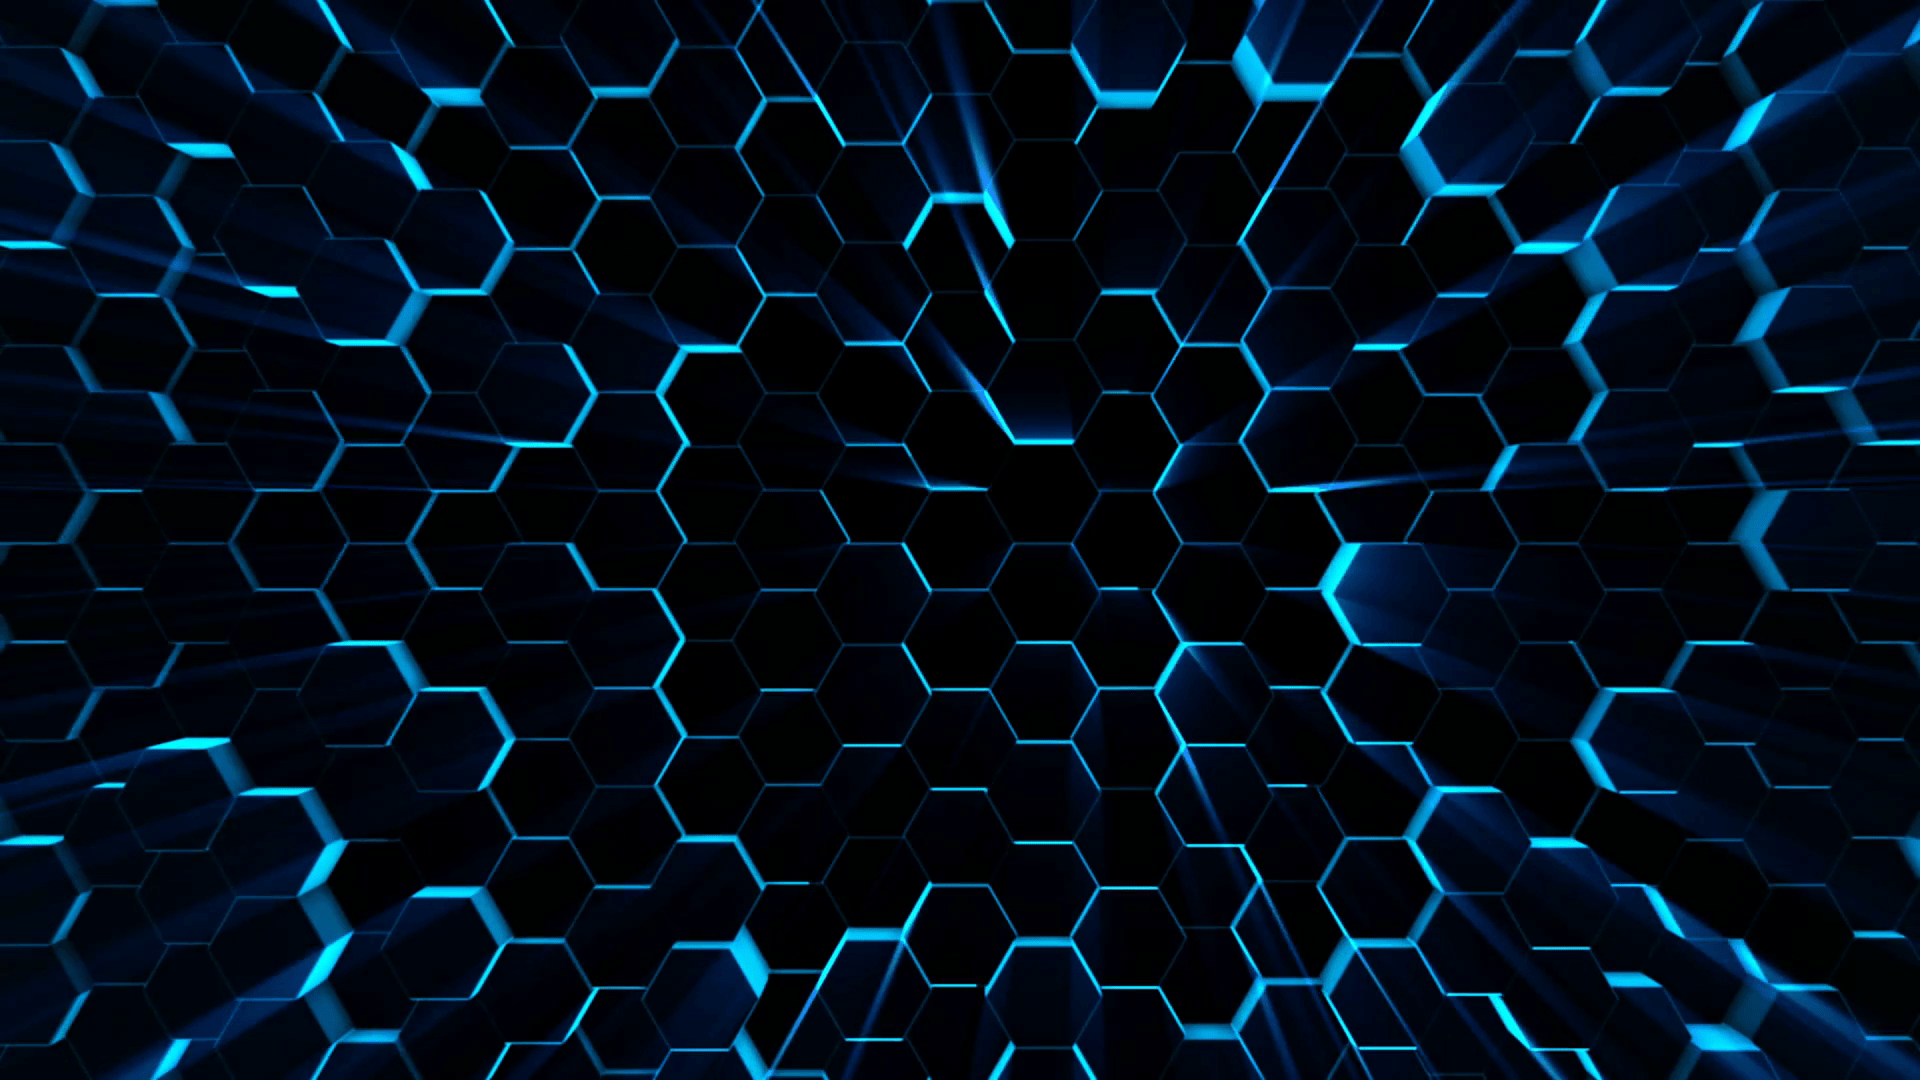 Hexagons with colorful lines background 4K wallpaper download